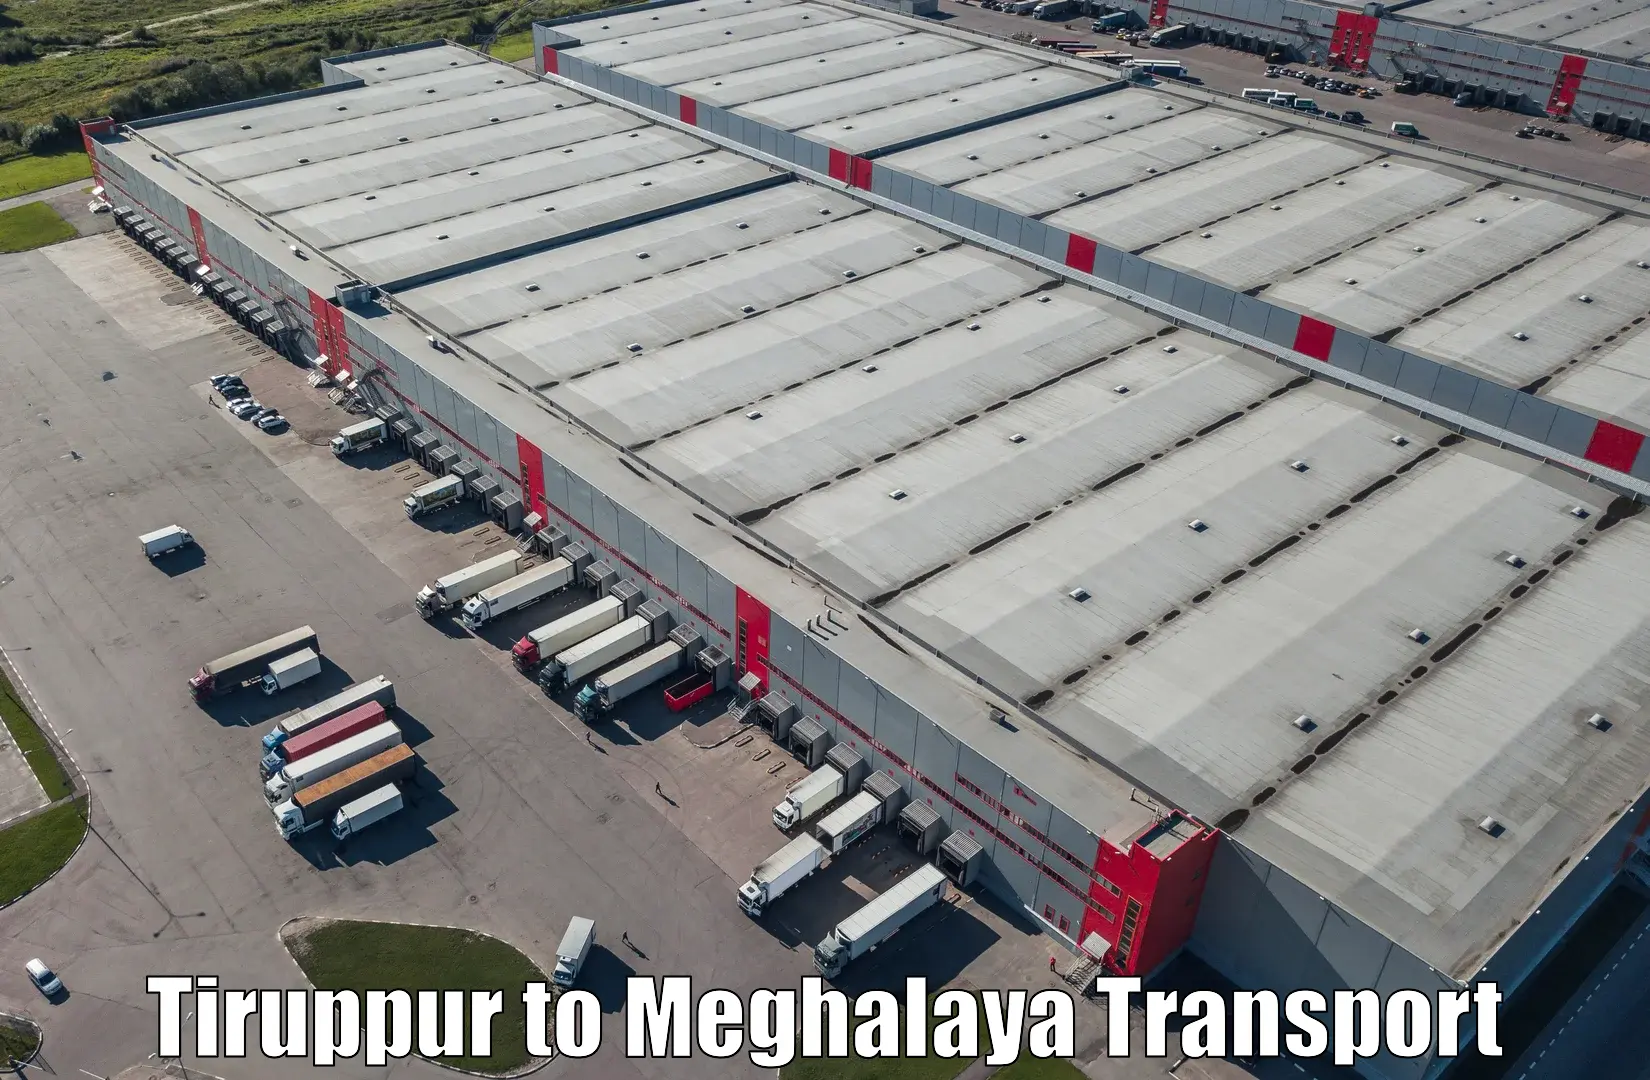 Truck transport companies in India in Tiruppur to Shillong